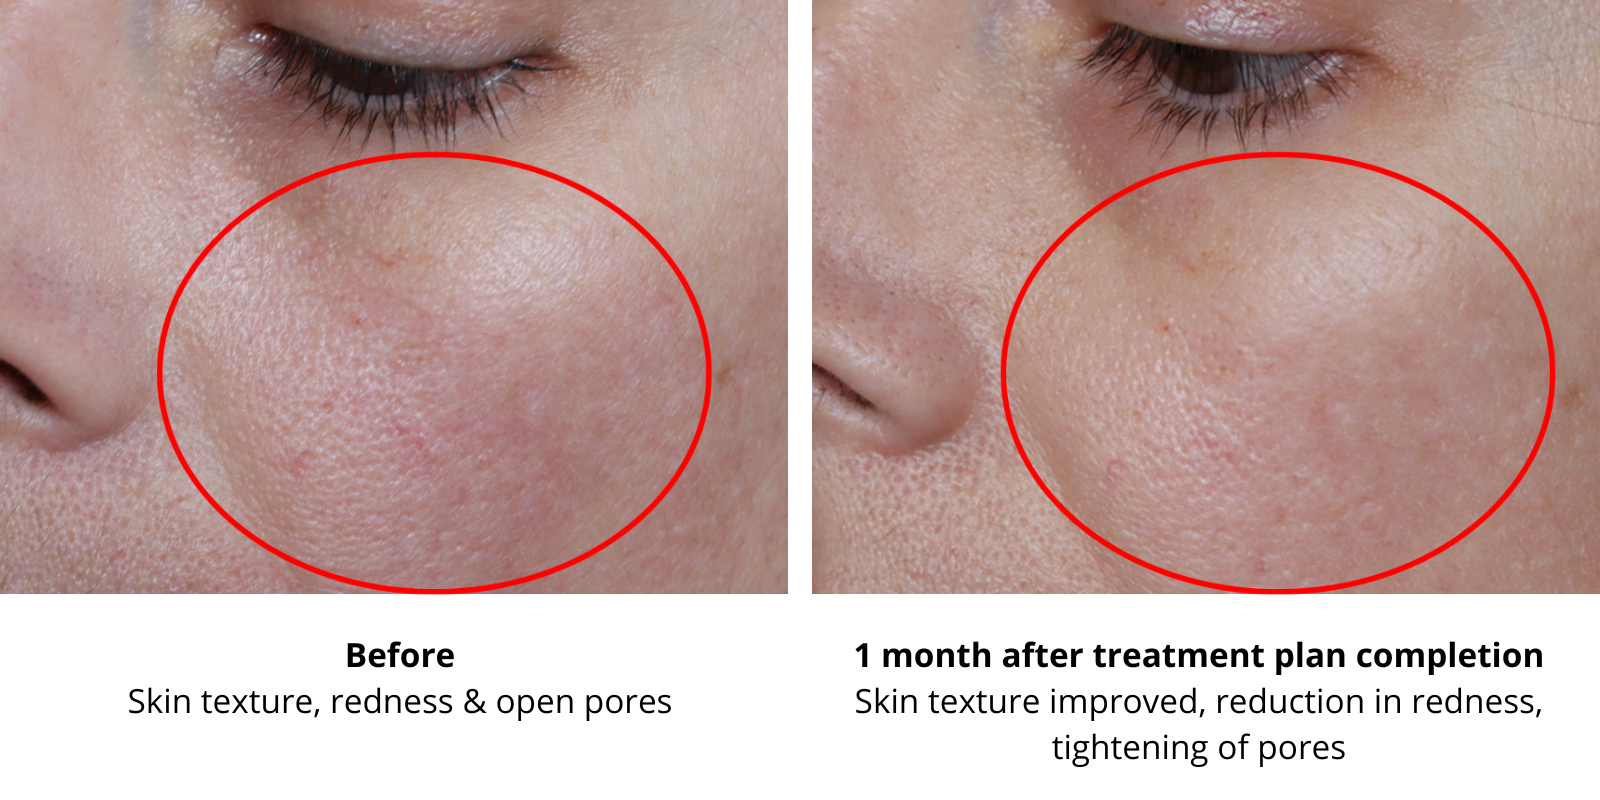 skin rejuvenation treatment Hampshire - reduction in skin redness and open pores